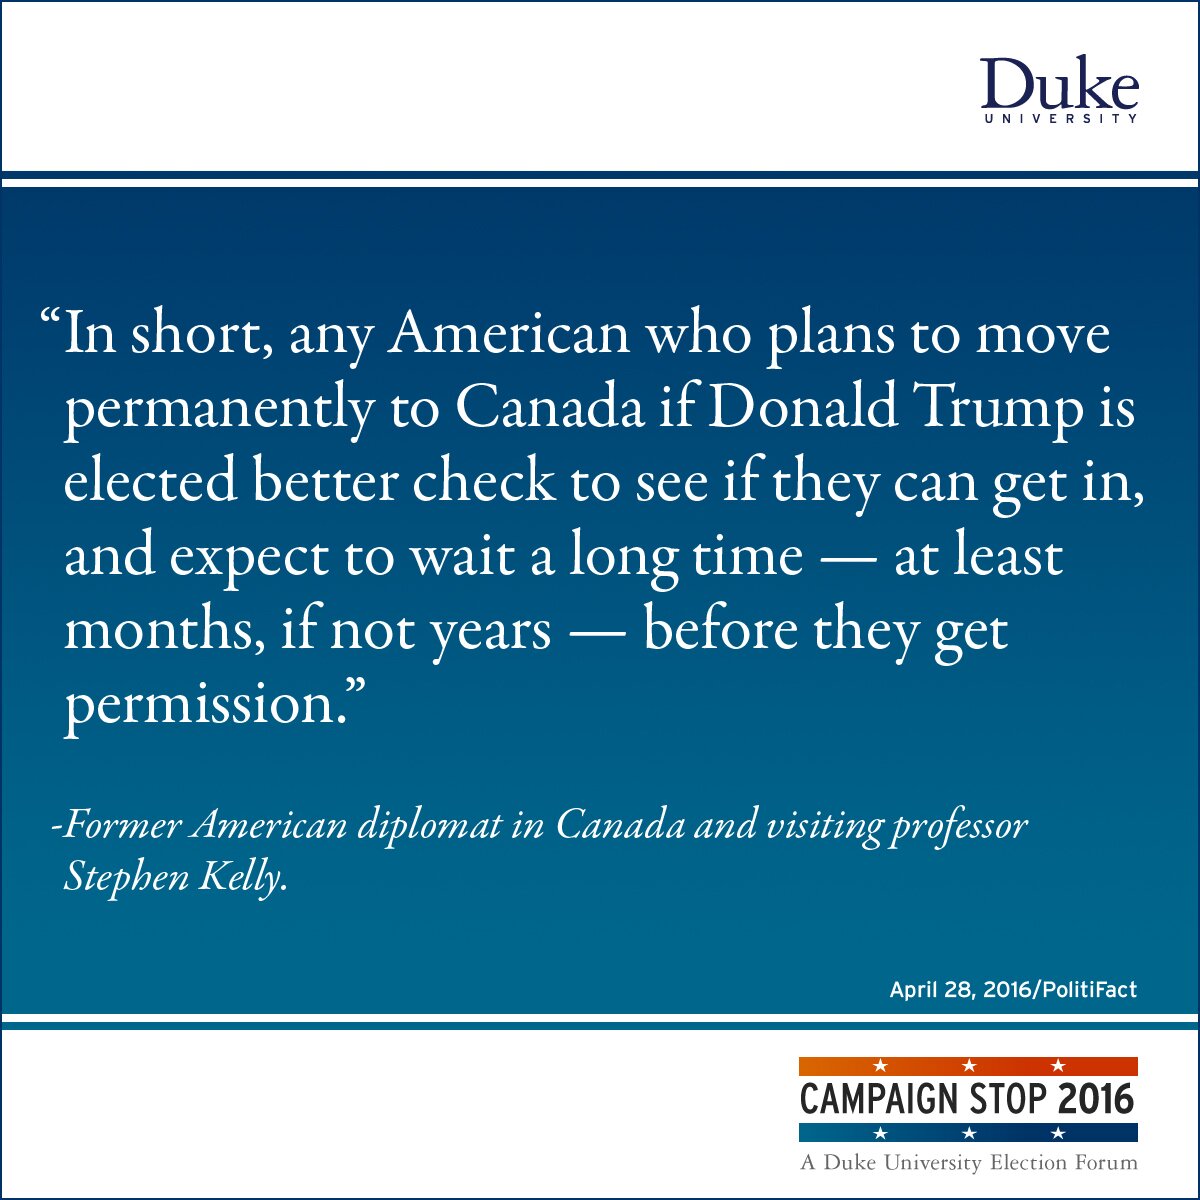 “In short, any American who plans to move permanently to Canada if Donald Trump is elected better check to see if they can get in, and expect to wait a long time — at least months, if not years — before they get permission.” -Former American diplomat in Canada and visiting professor Stephen Kelly.